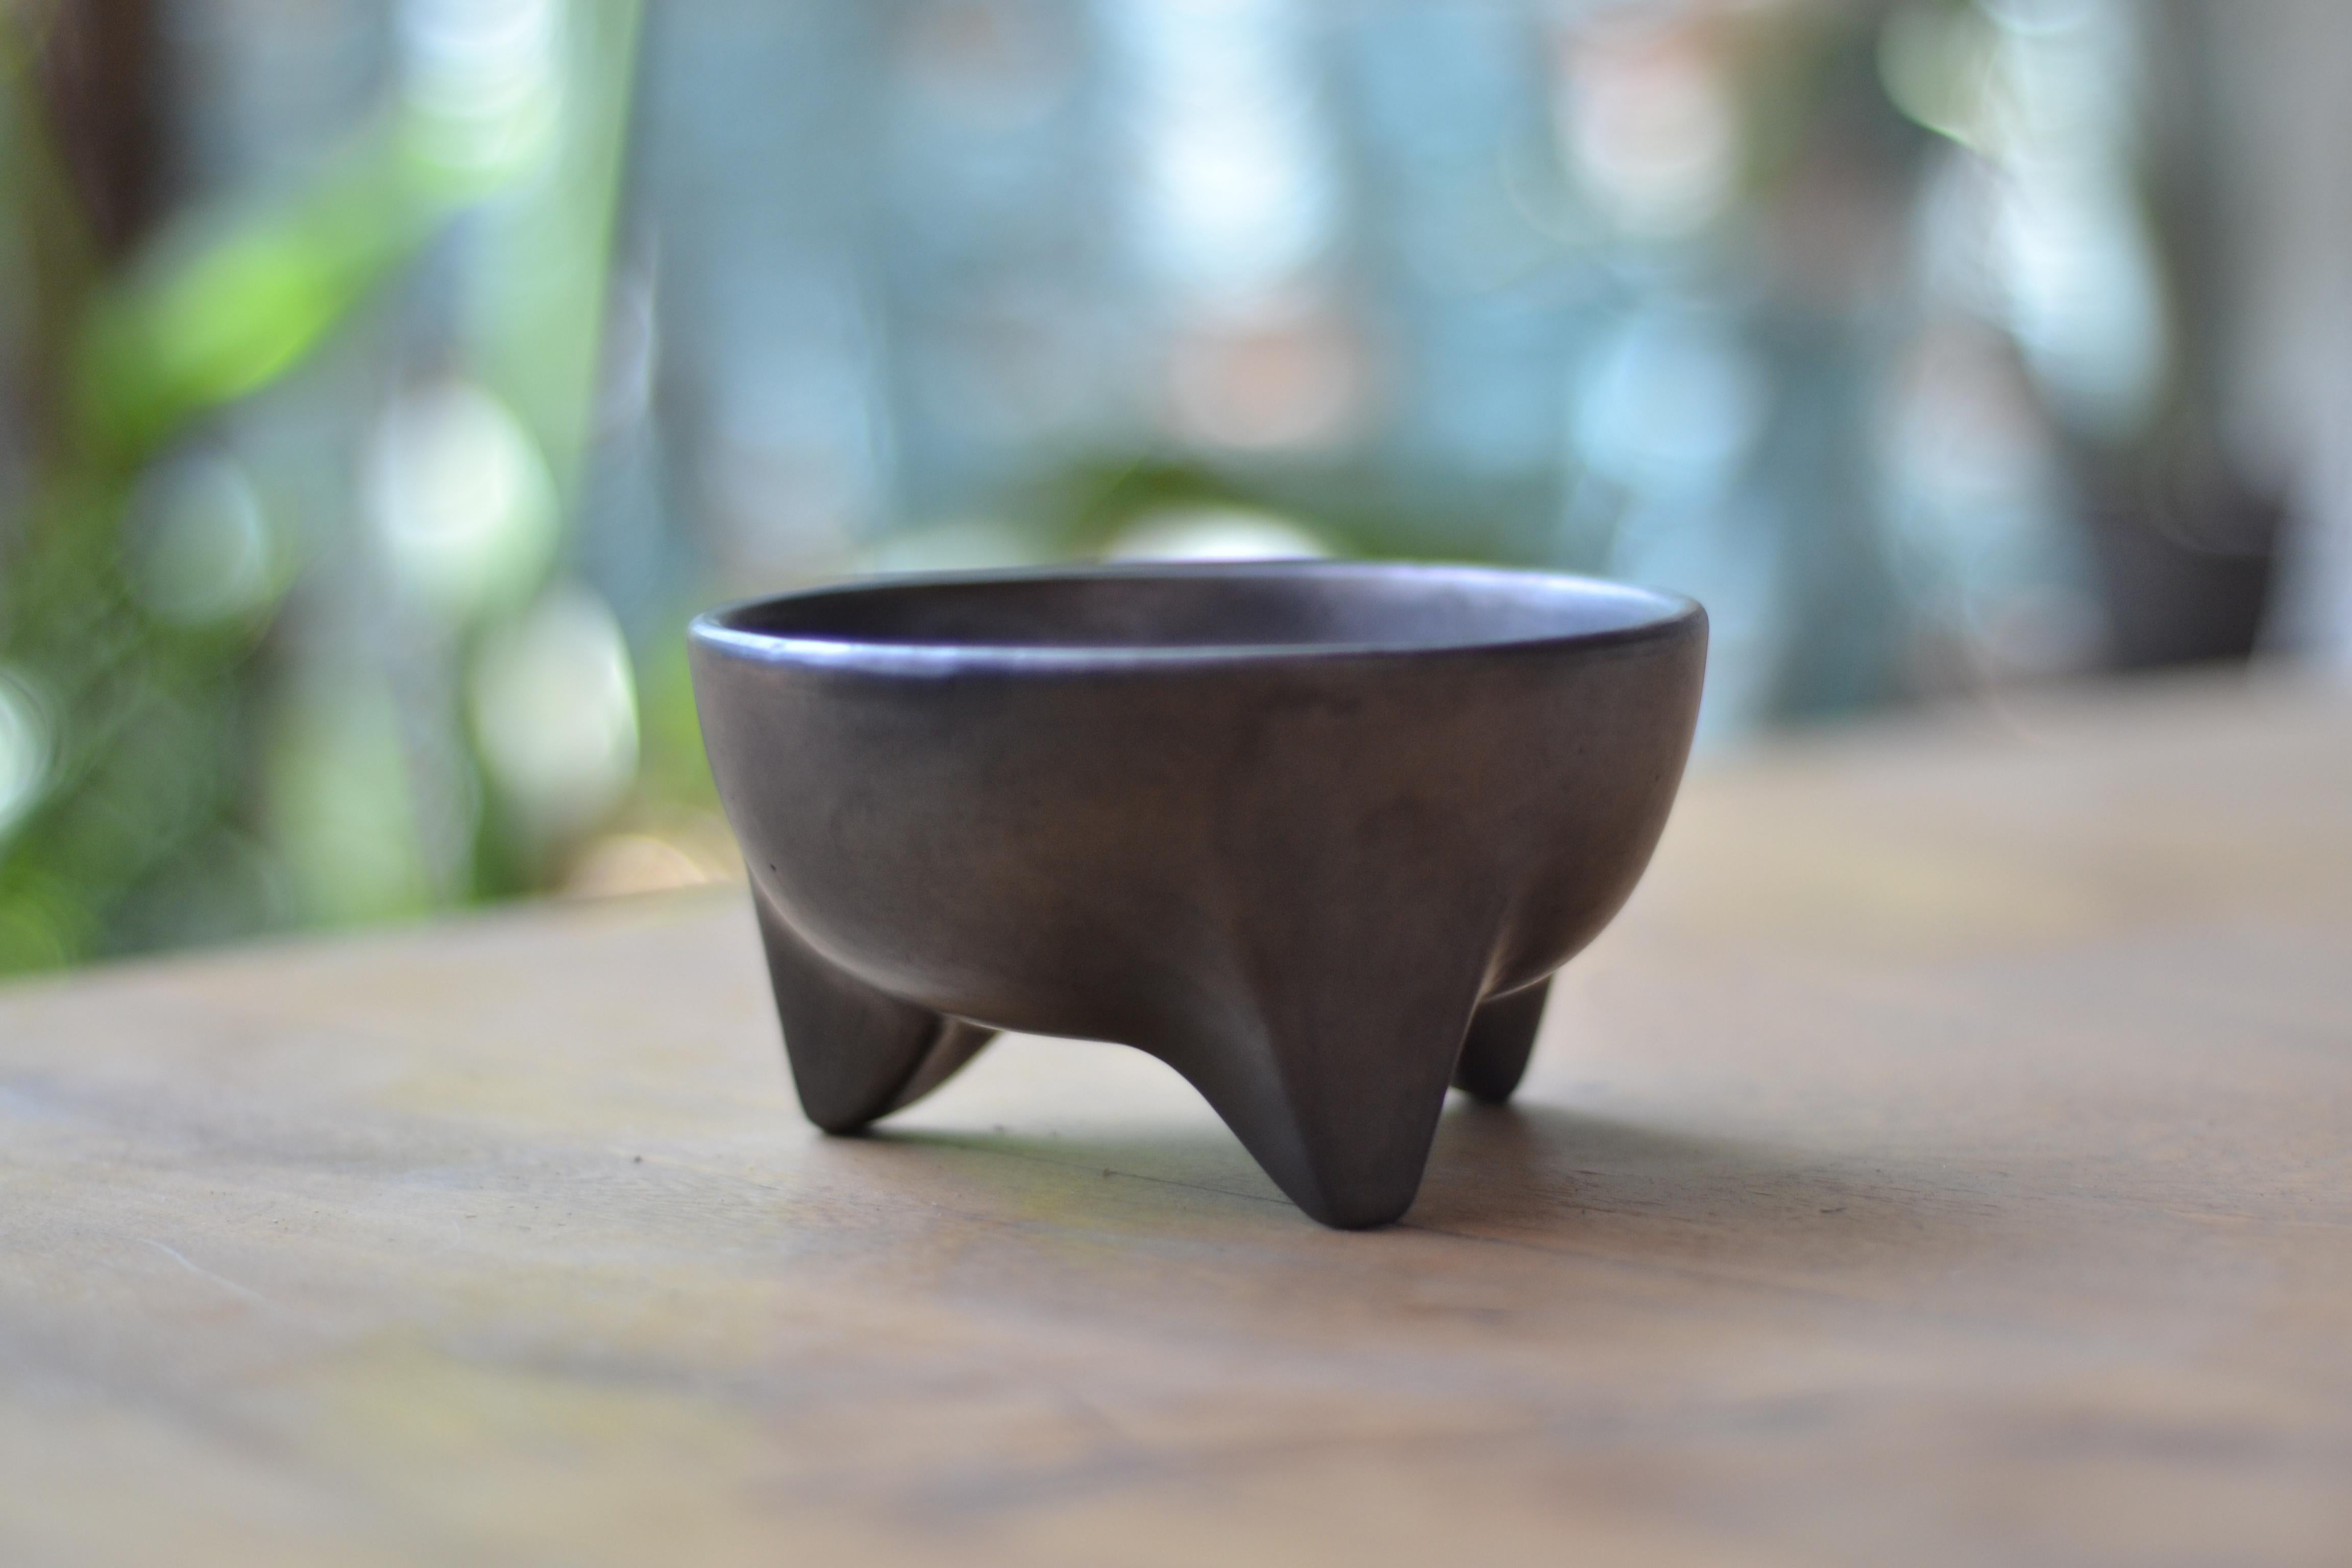 Oaxaca Black Clay Tzinacan Decorative Burnished Polished Fired Oxygen Reduction In New Condition For Sale In London, GB